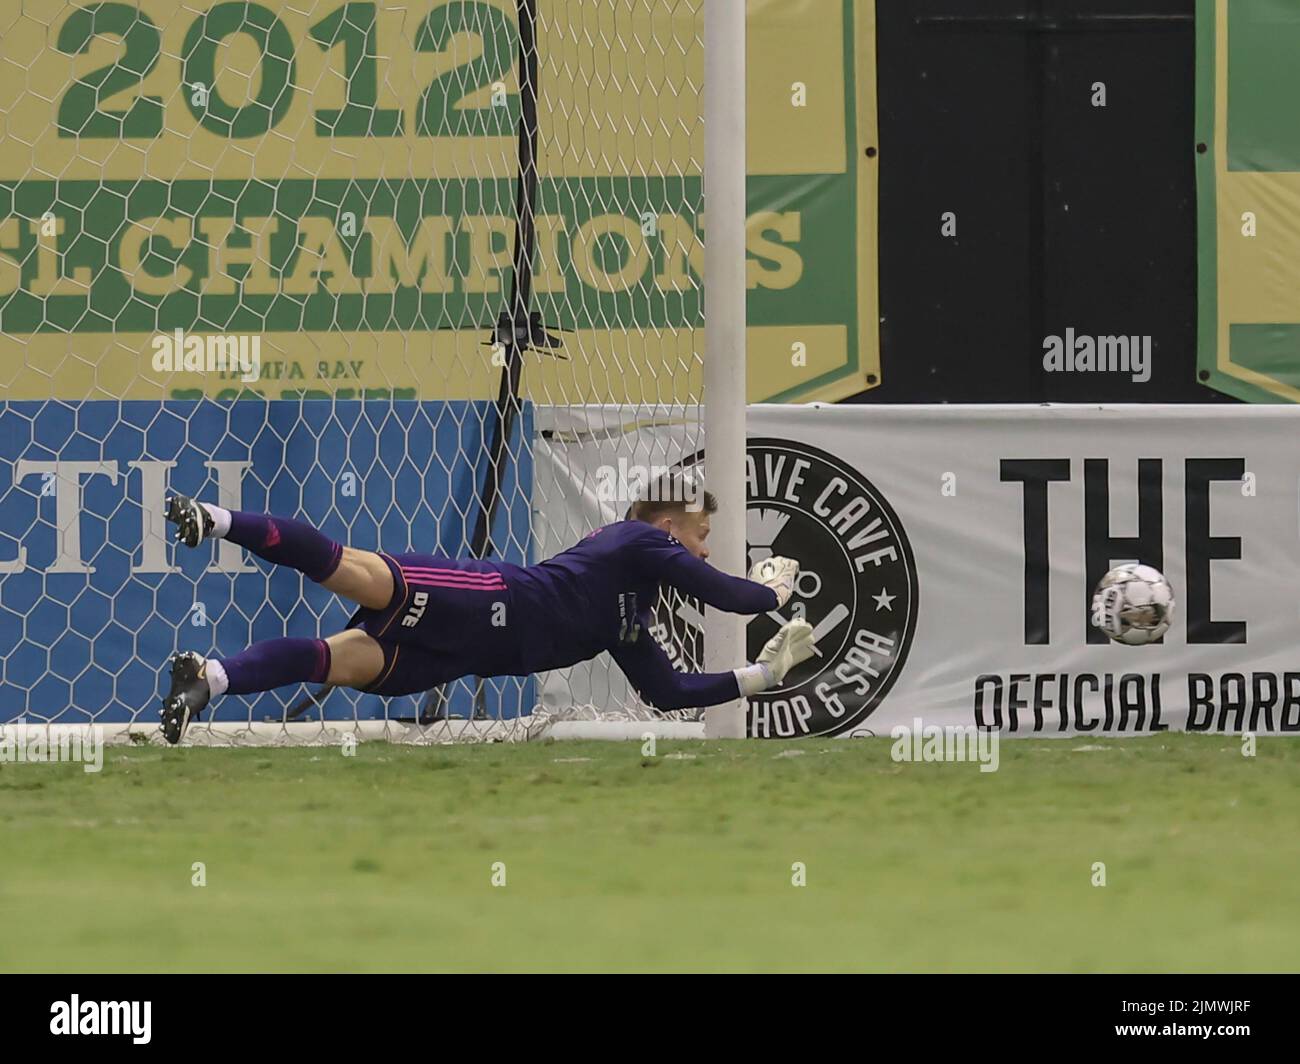 St. Petersburg, FL: Detroit City goalkeeper Nate Steinwascher (1) makes a save during a USL soccer game against the Tampa Bay Rowdies, Saturday, Augus Stock Photo